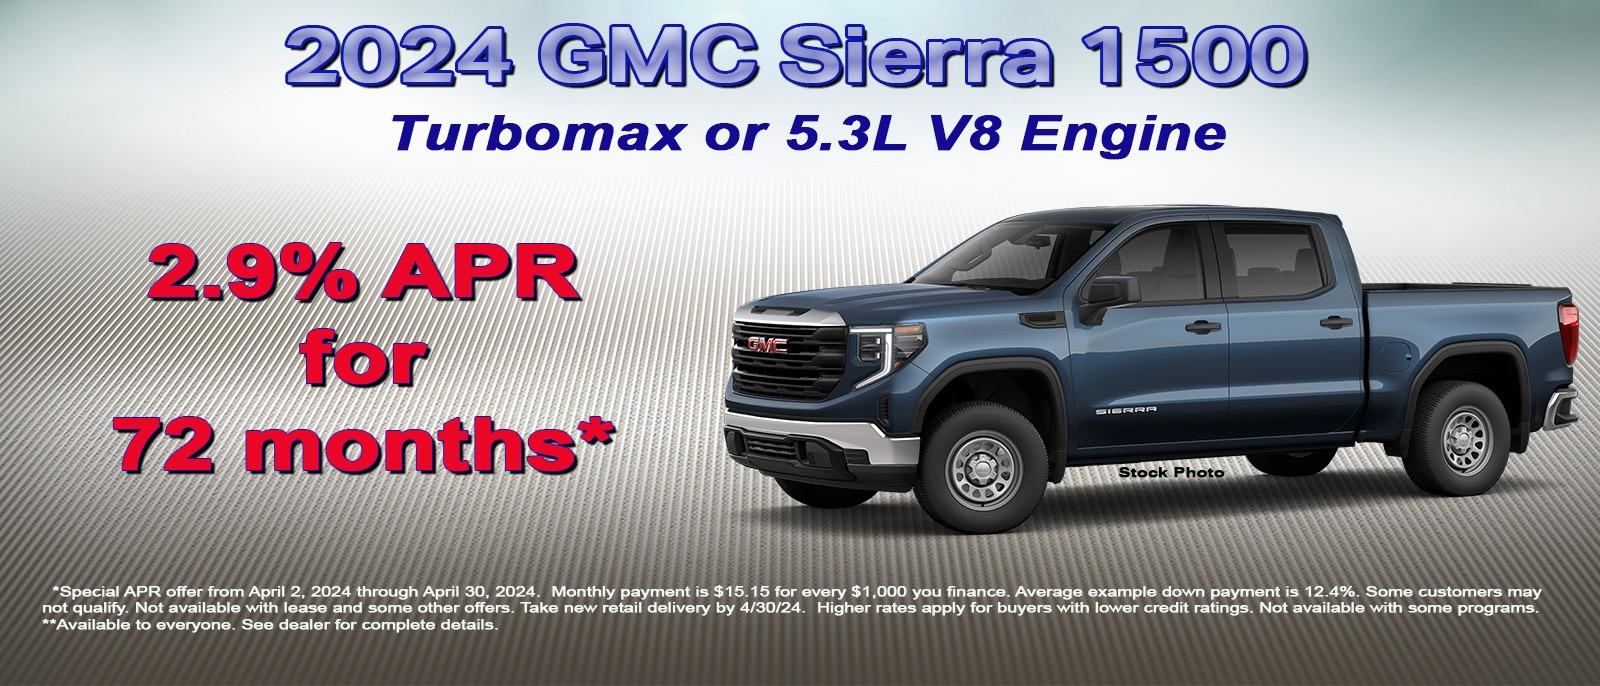 Get a 2.9 APR on your new GMC Sierra